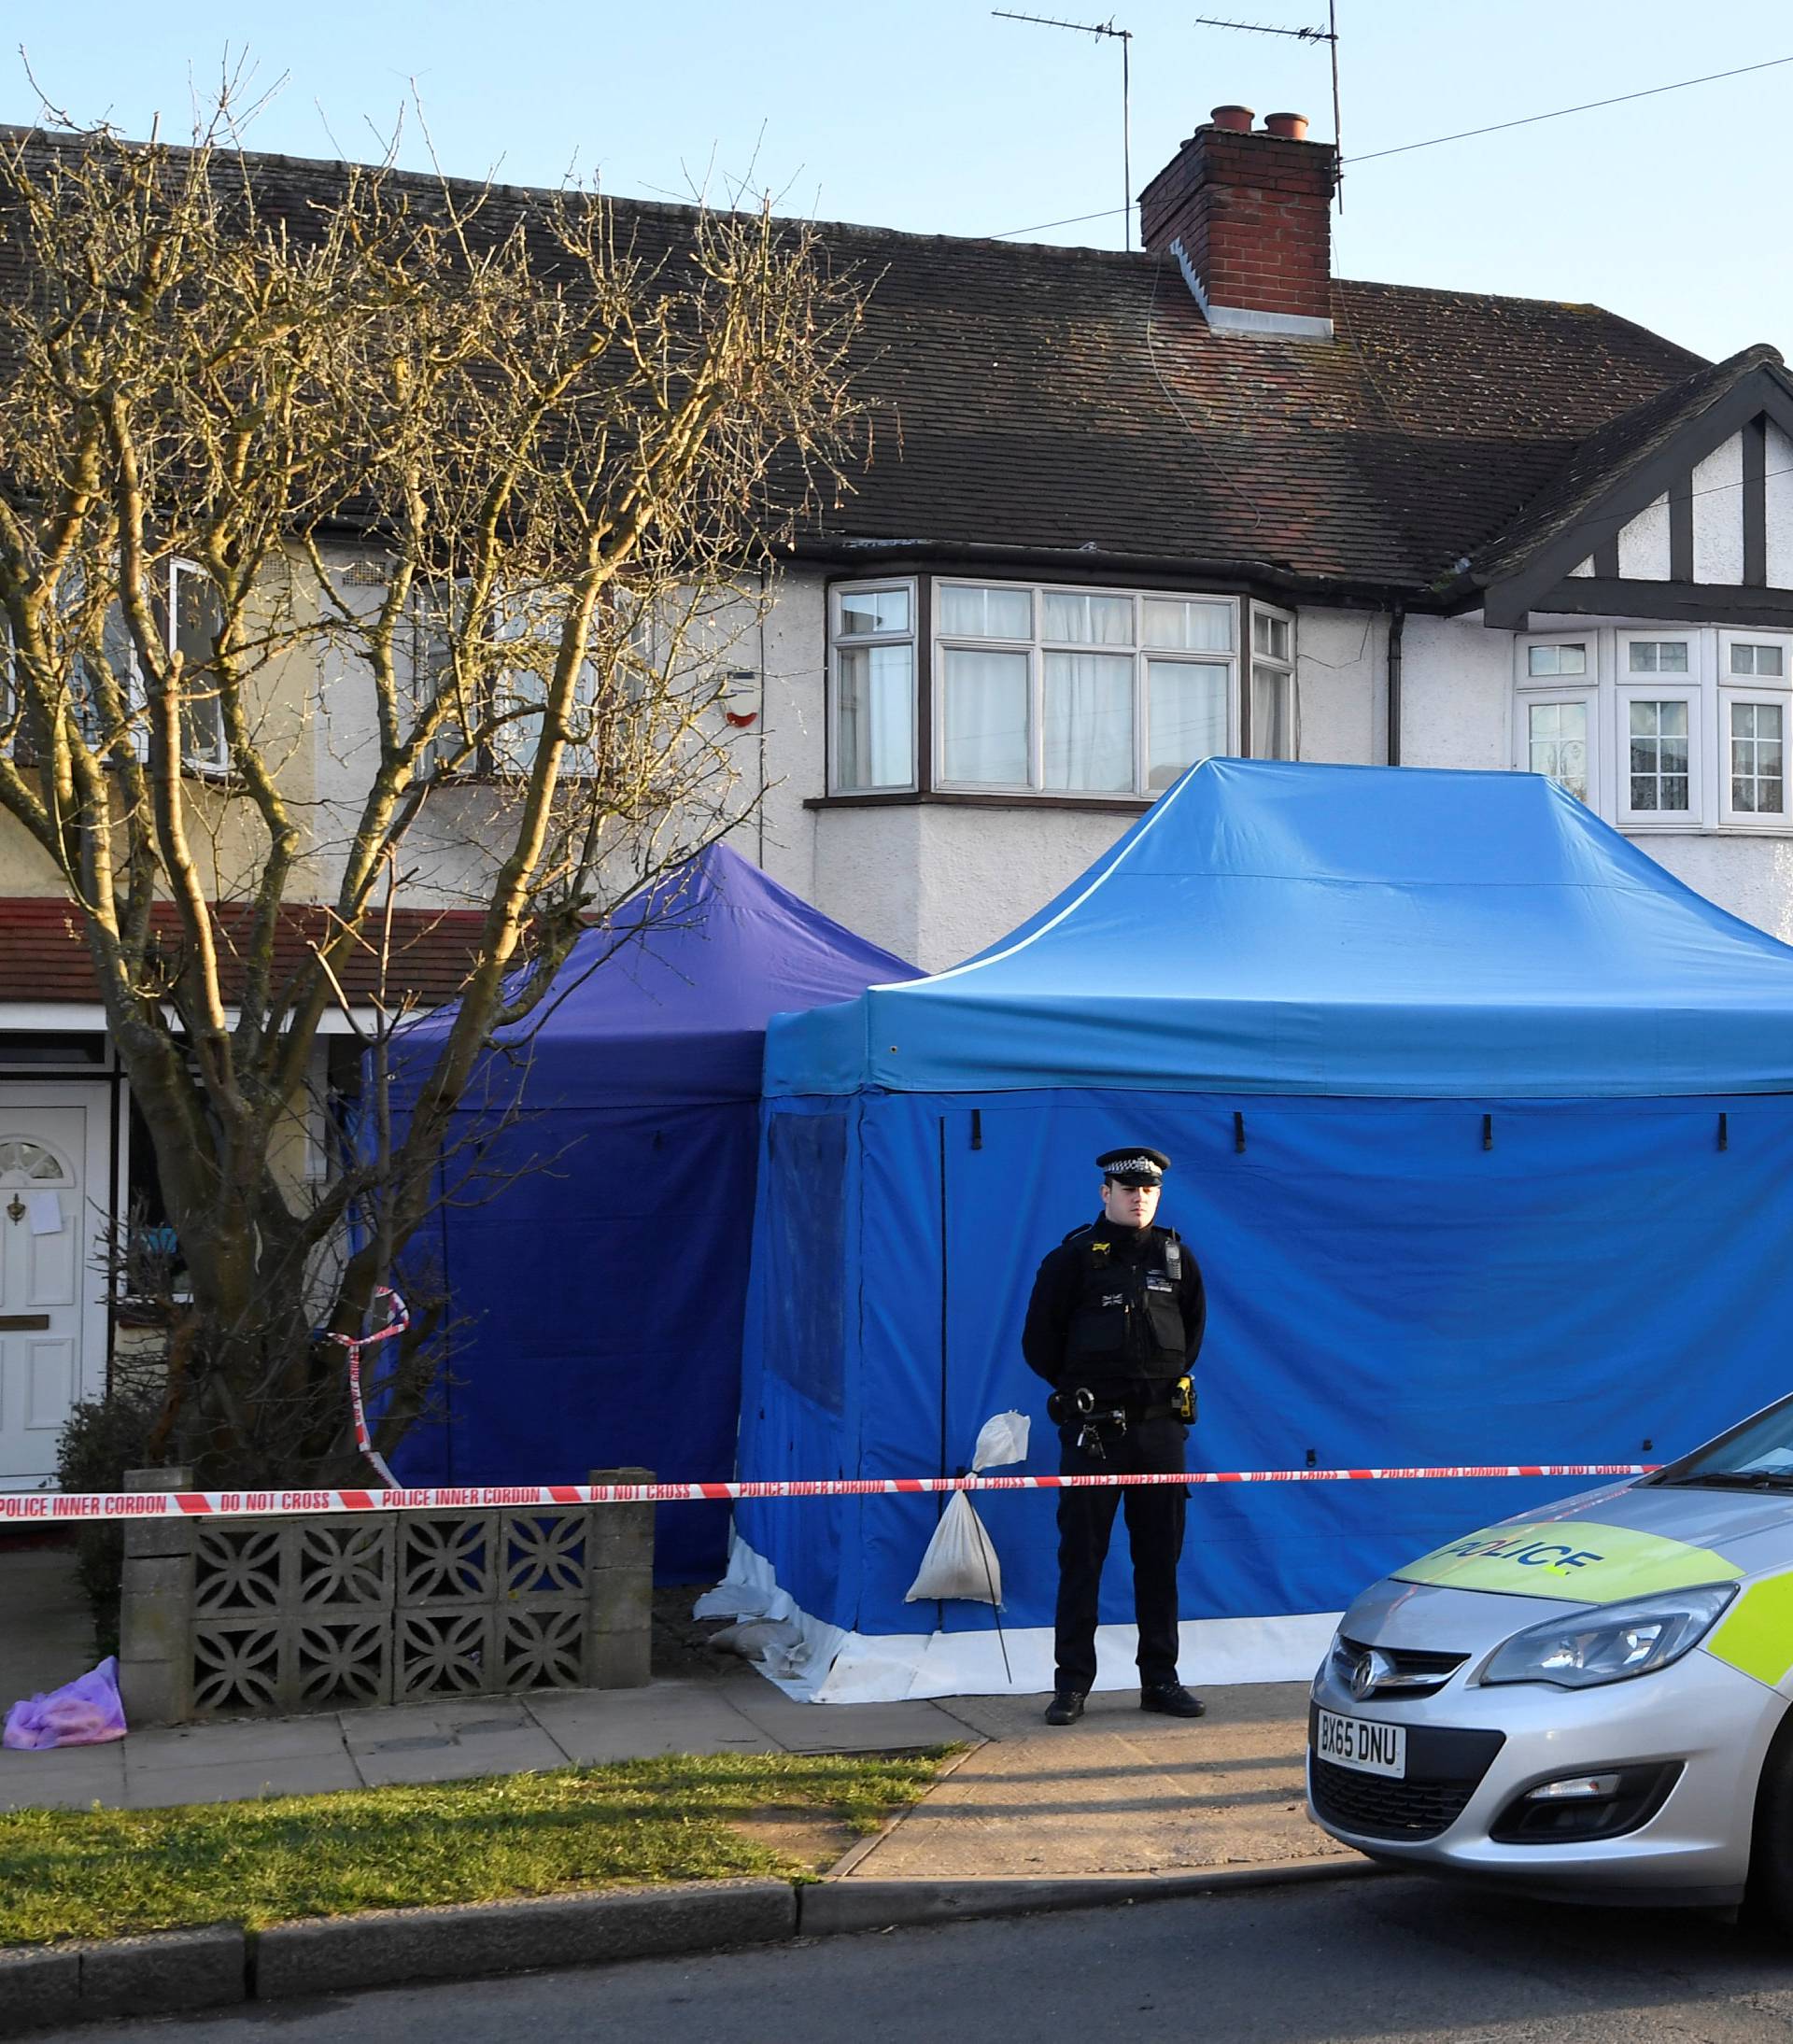 A police officer stands on duty outside the home of Nikolai Glushkov in New Malden, on the outskirts of London